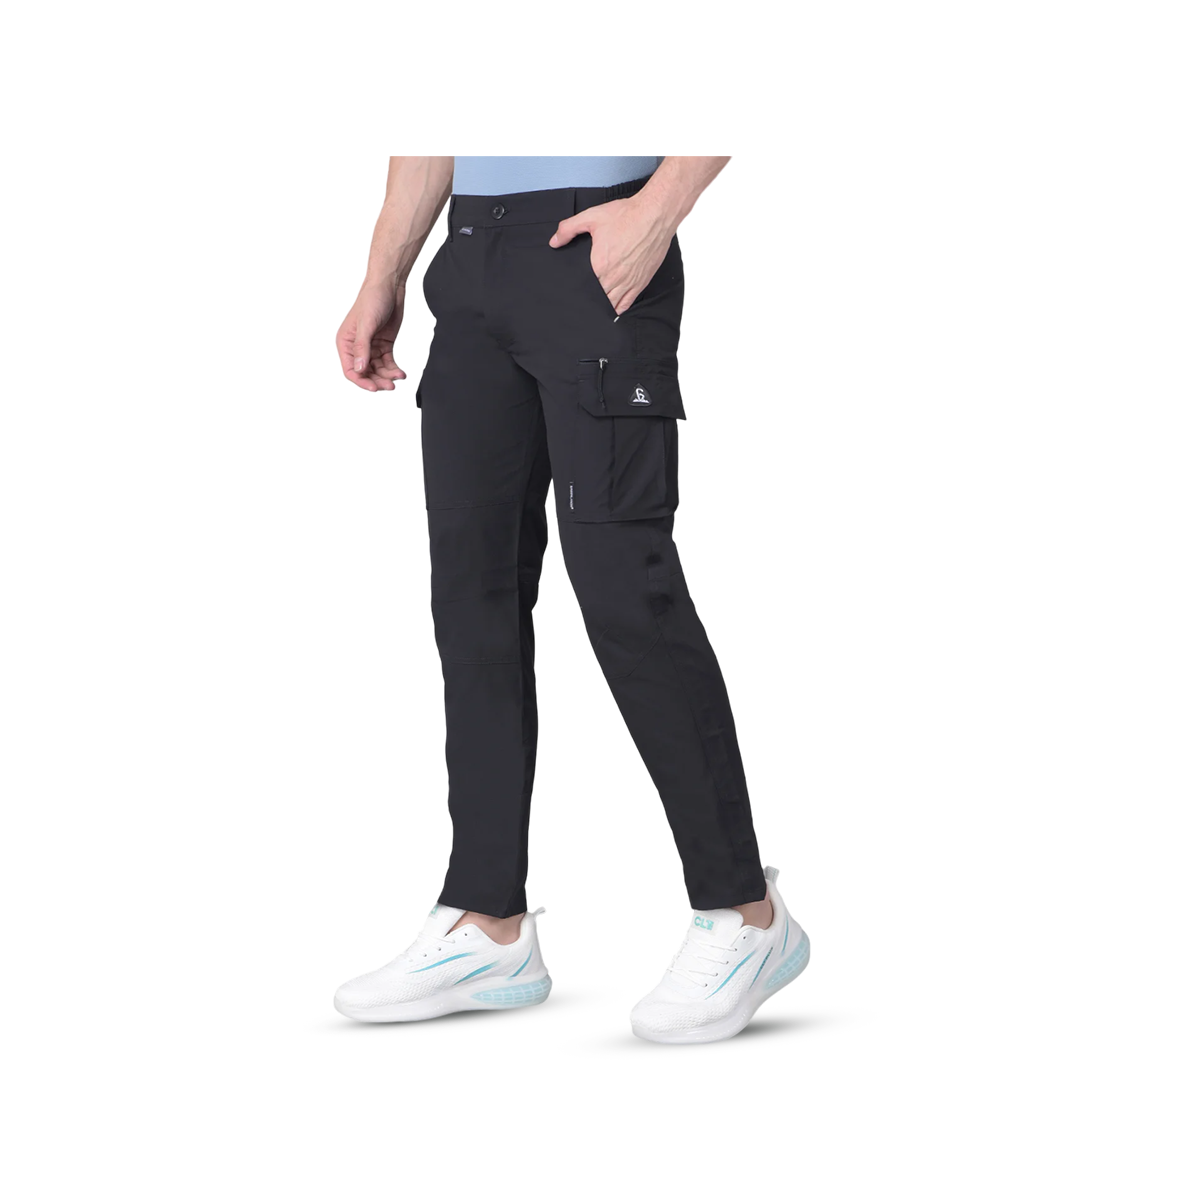 QUADRA Black Trouser for Sleek Style and All-Day Comfort - Small